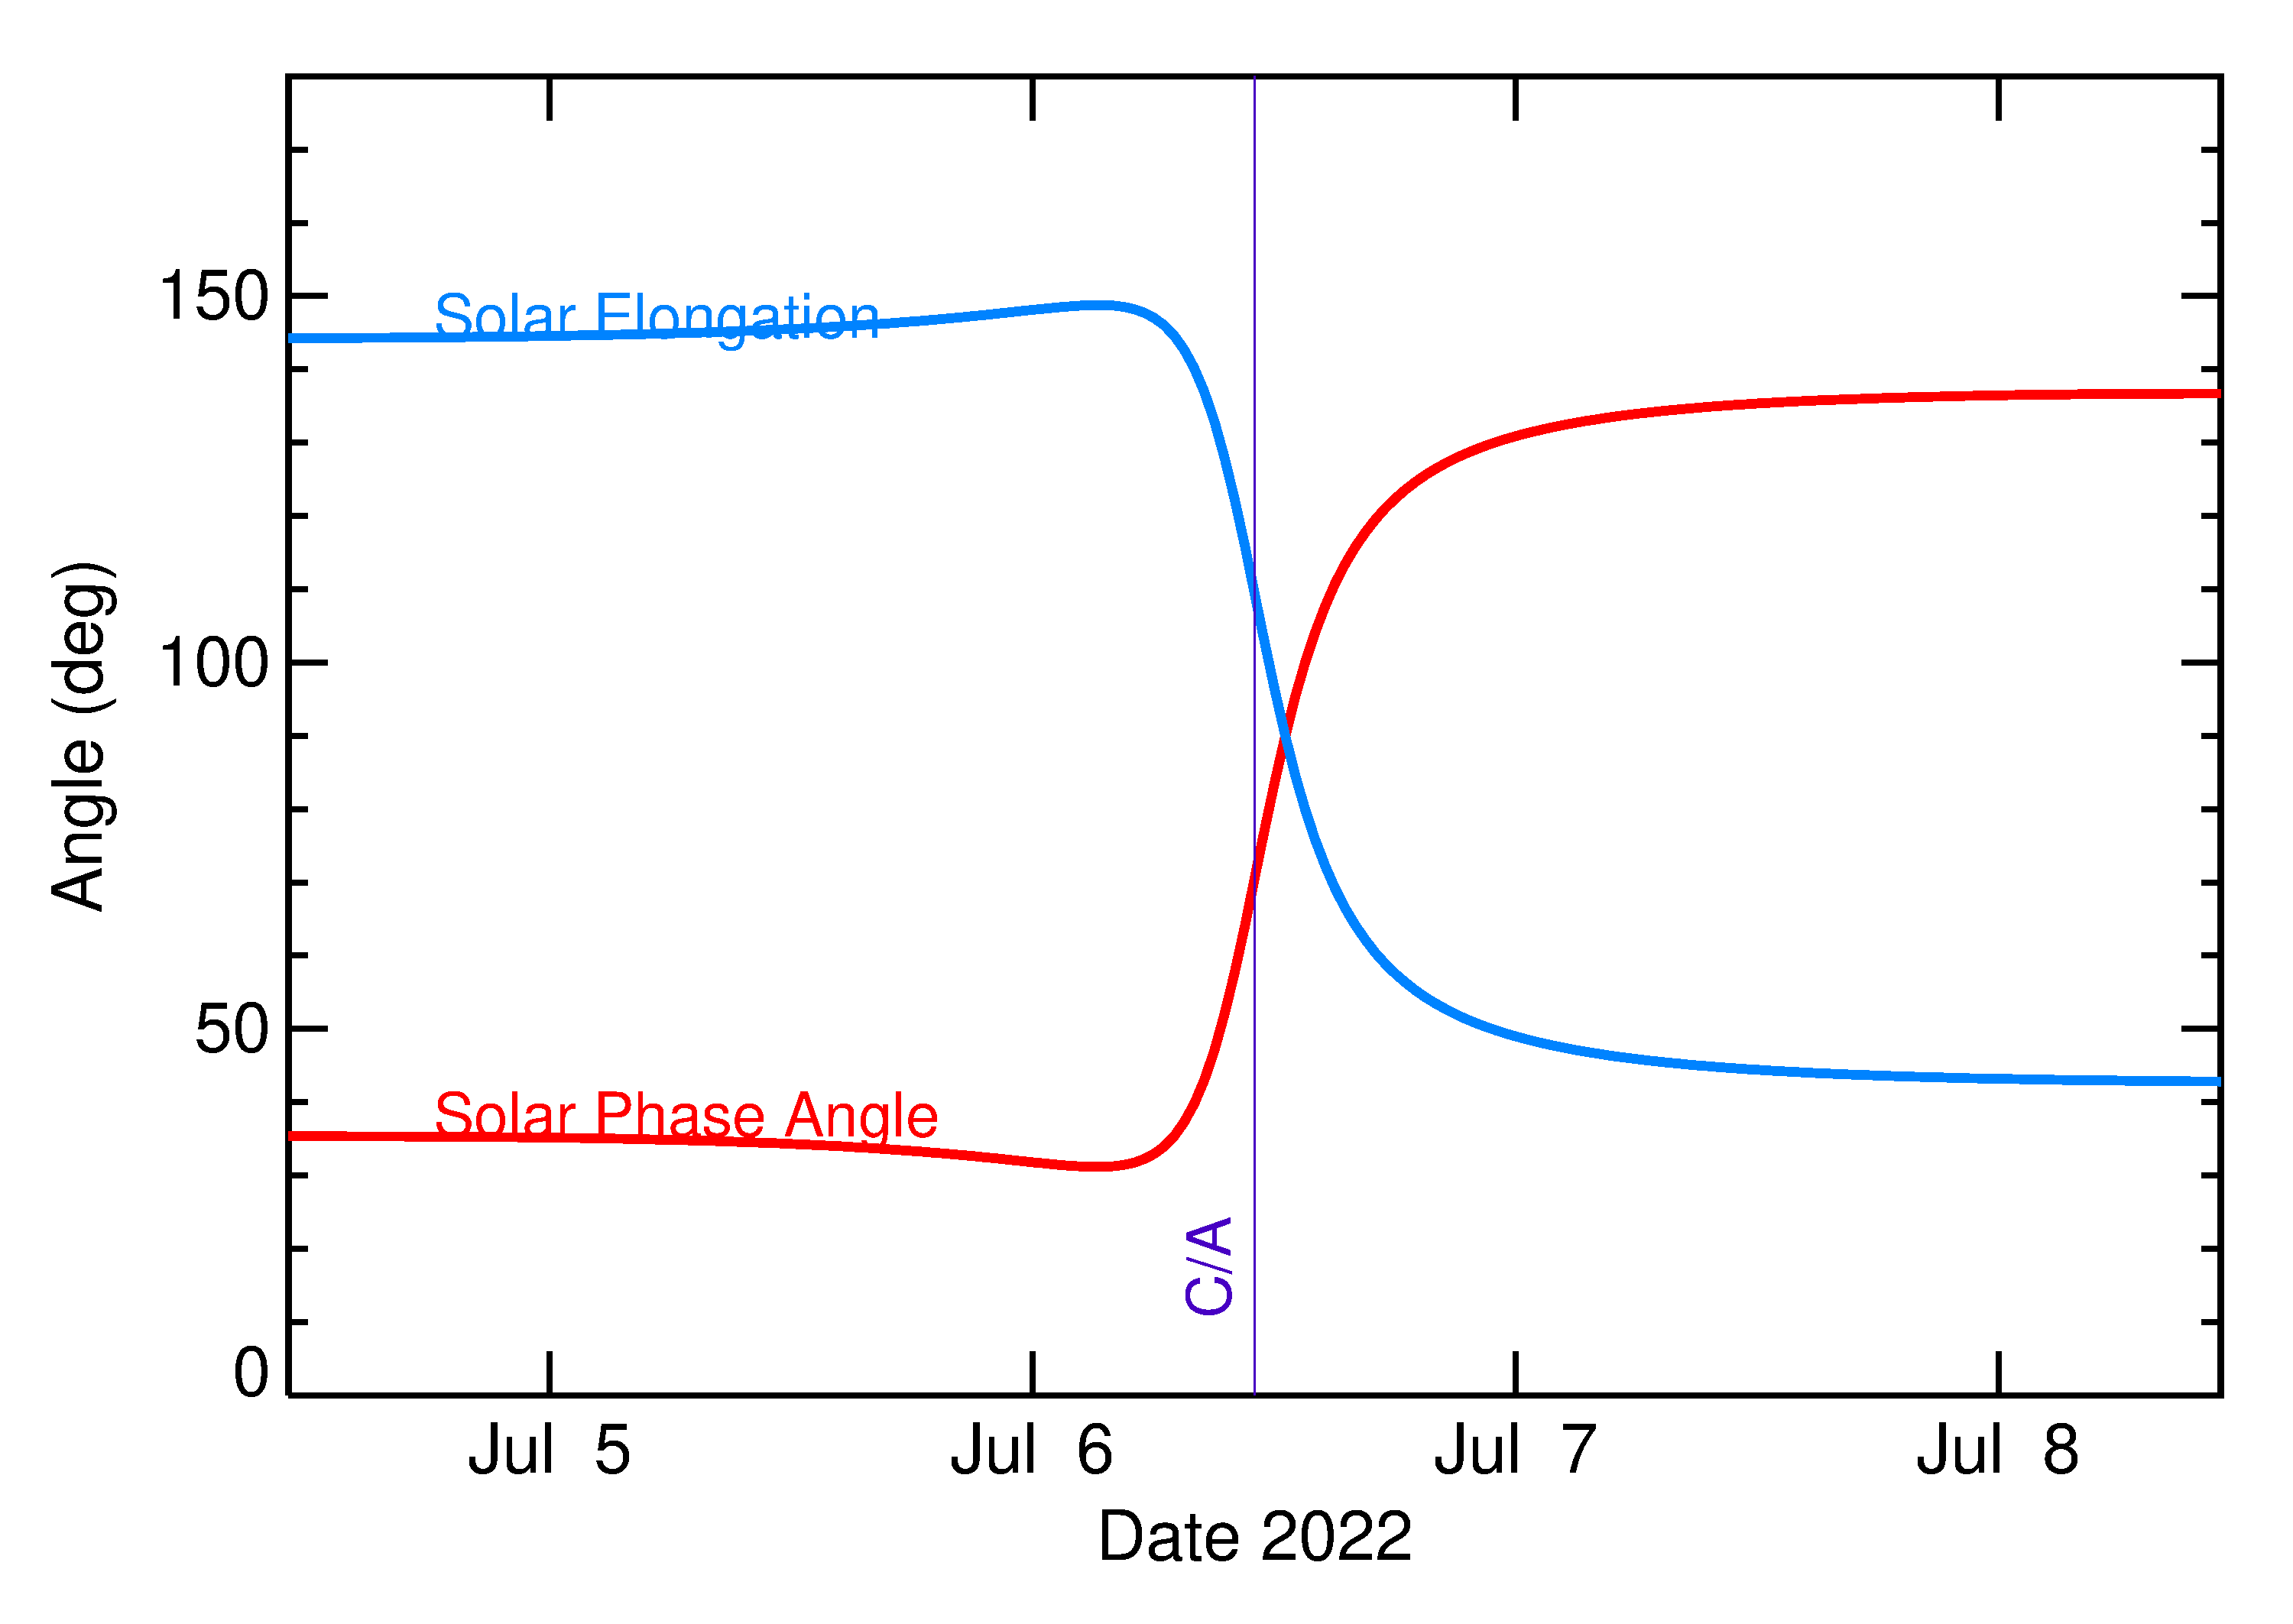 Solar Elongation and Solar Phase Angle of 2022 NE in the days around closest approach